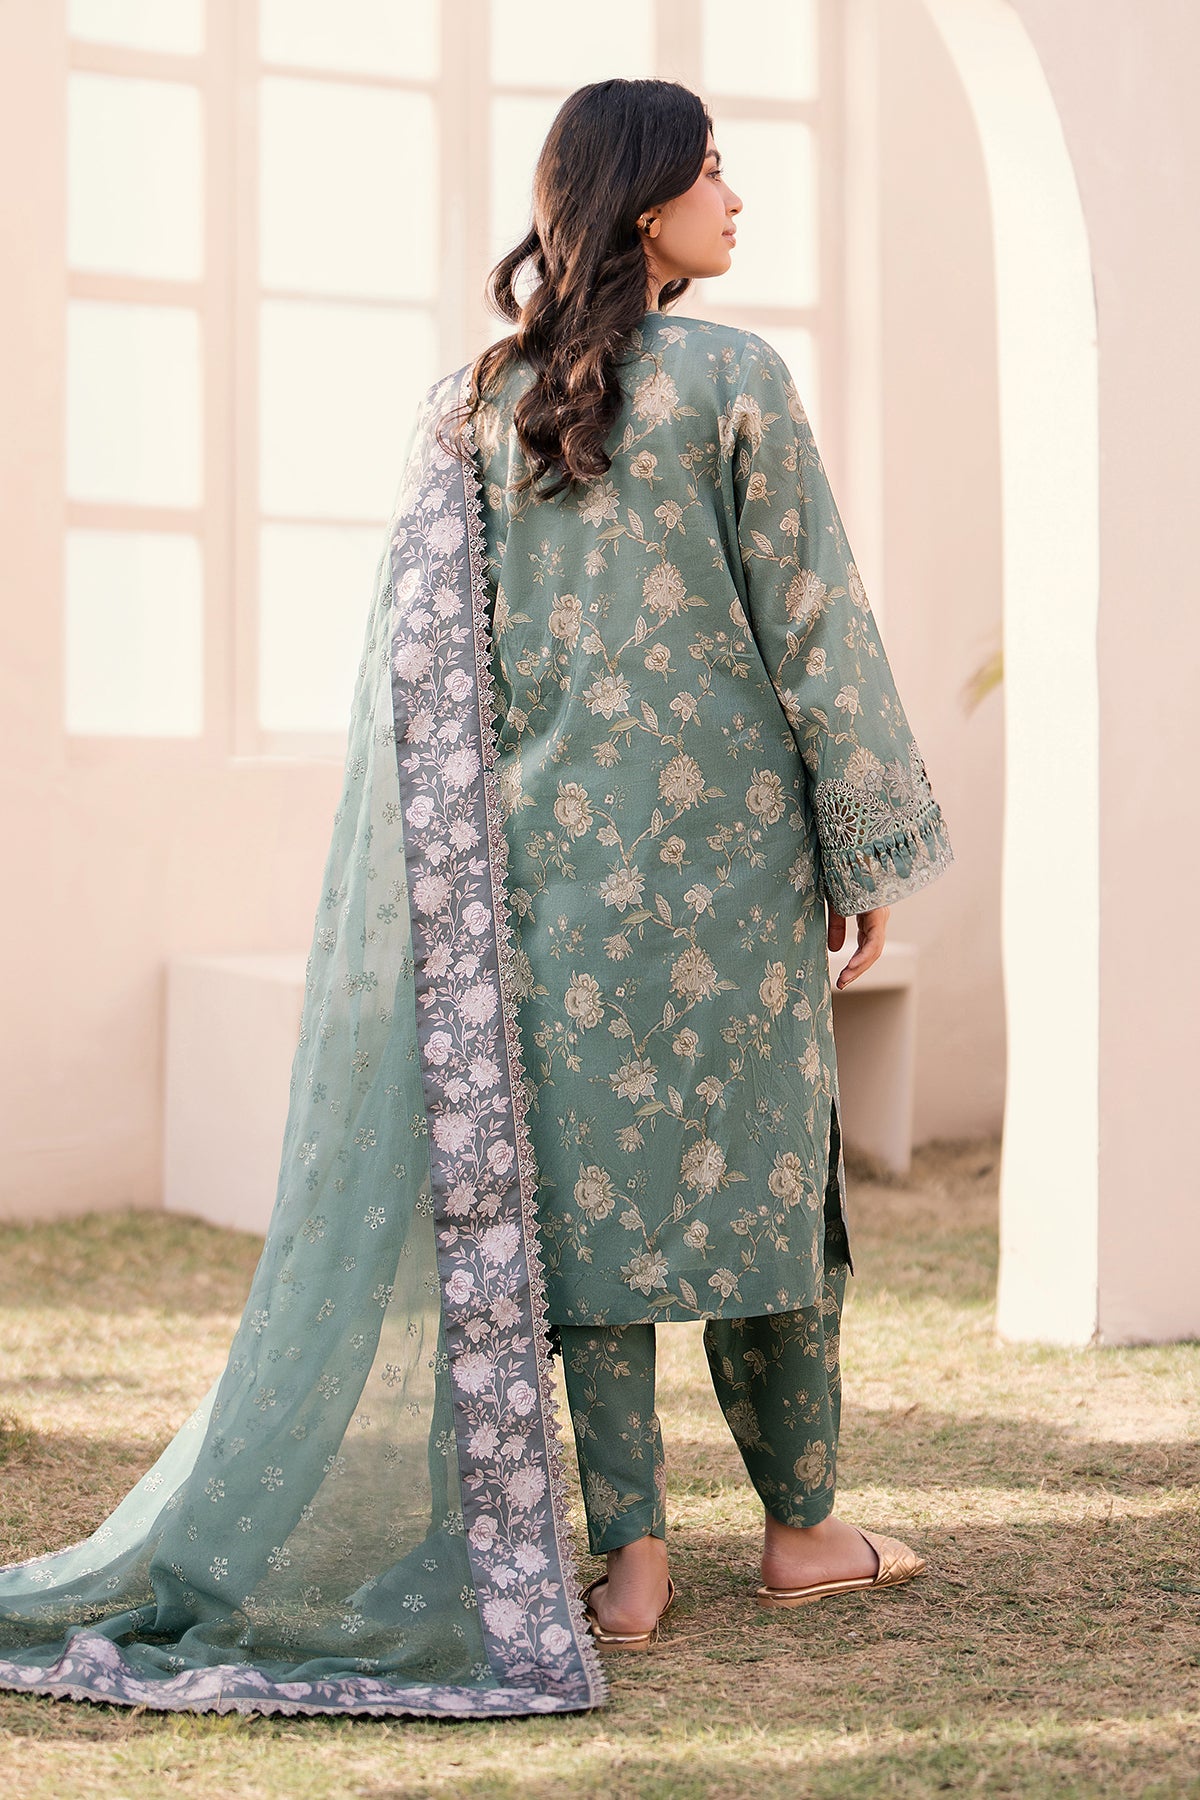 EMBROIDERED PRINTED LAWN UF-599